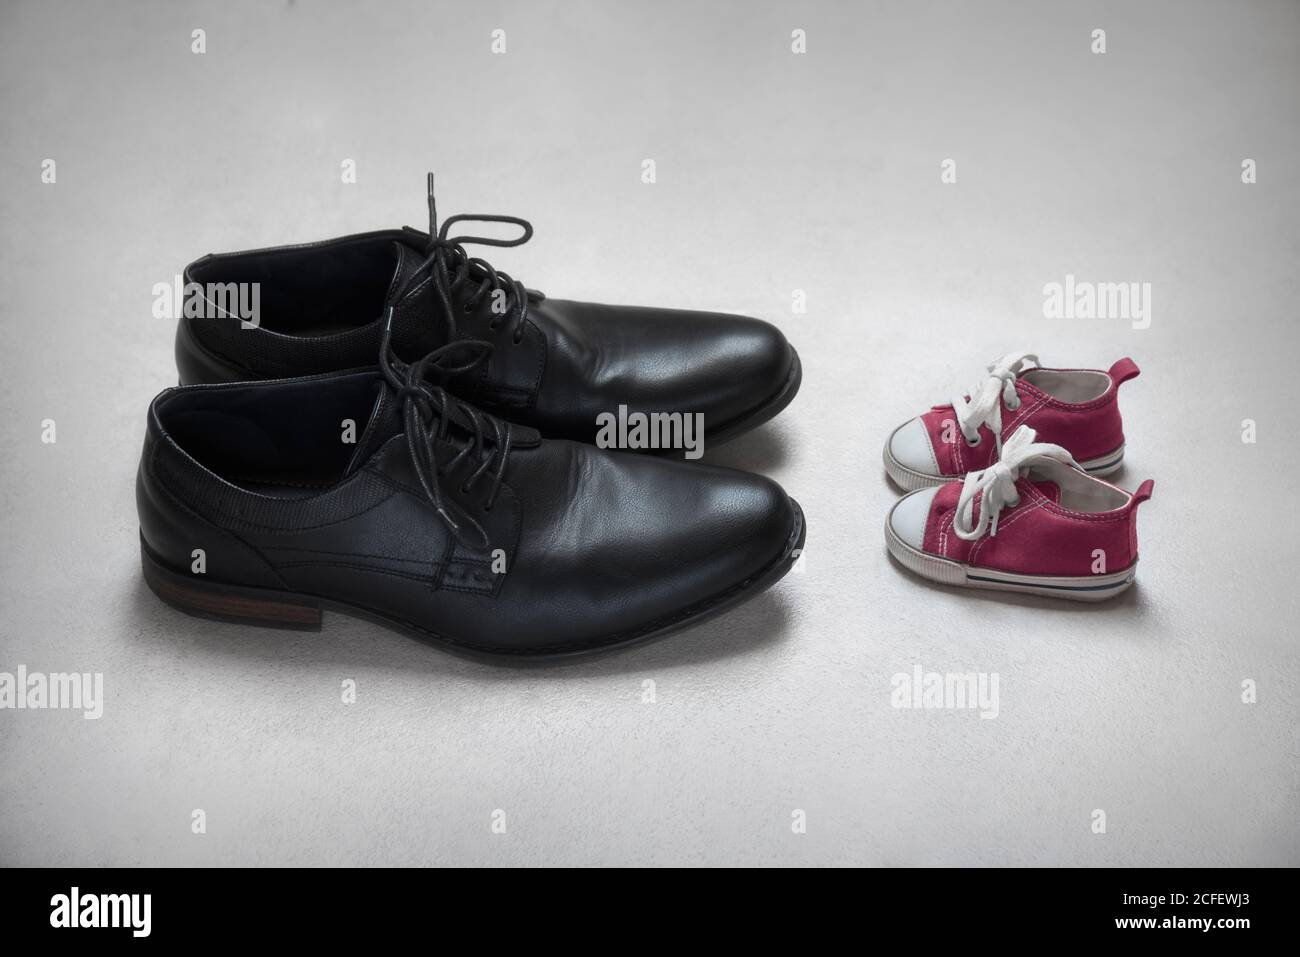 Father with daughter metaphor, baby and adult shoes. Stock Photo